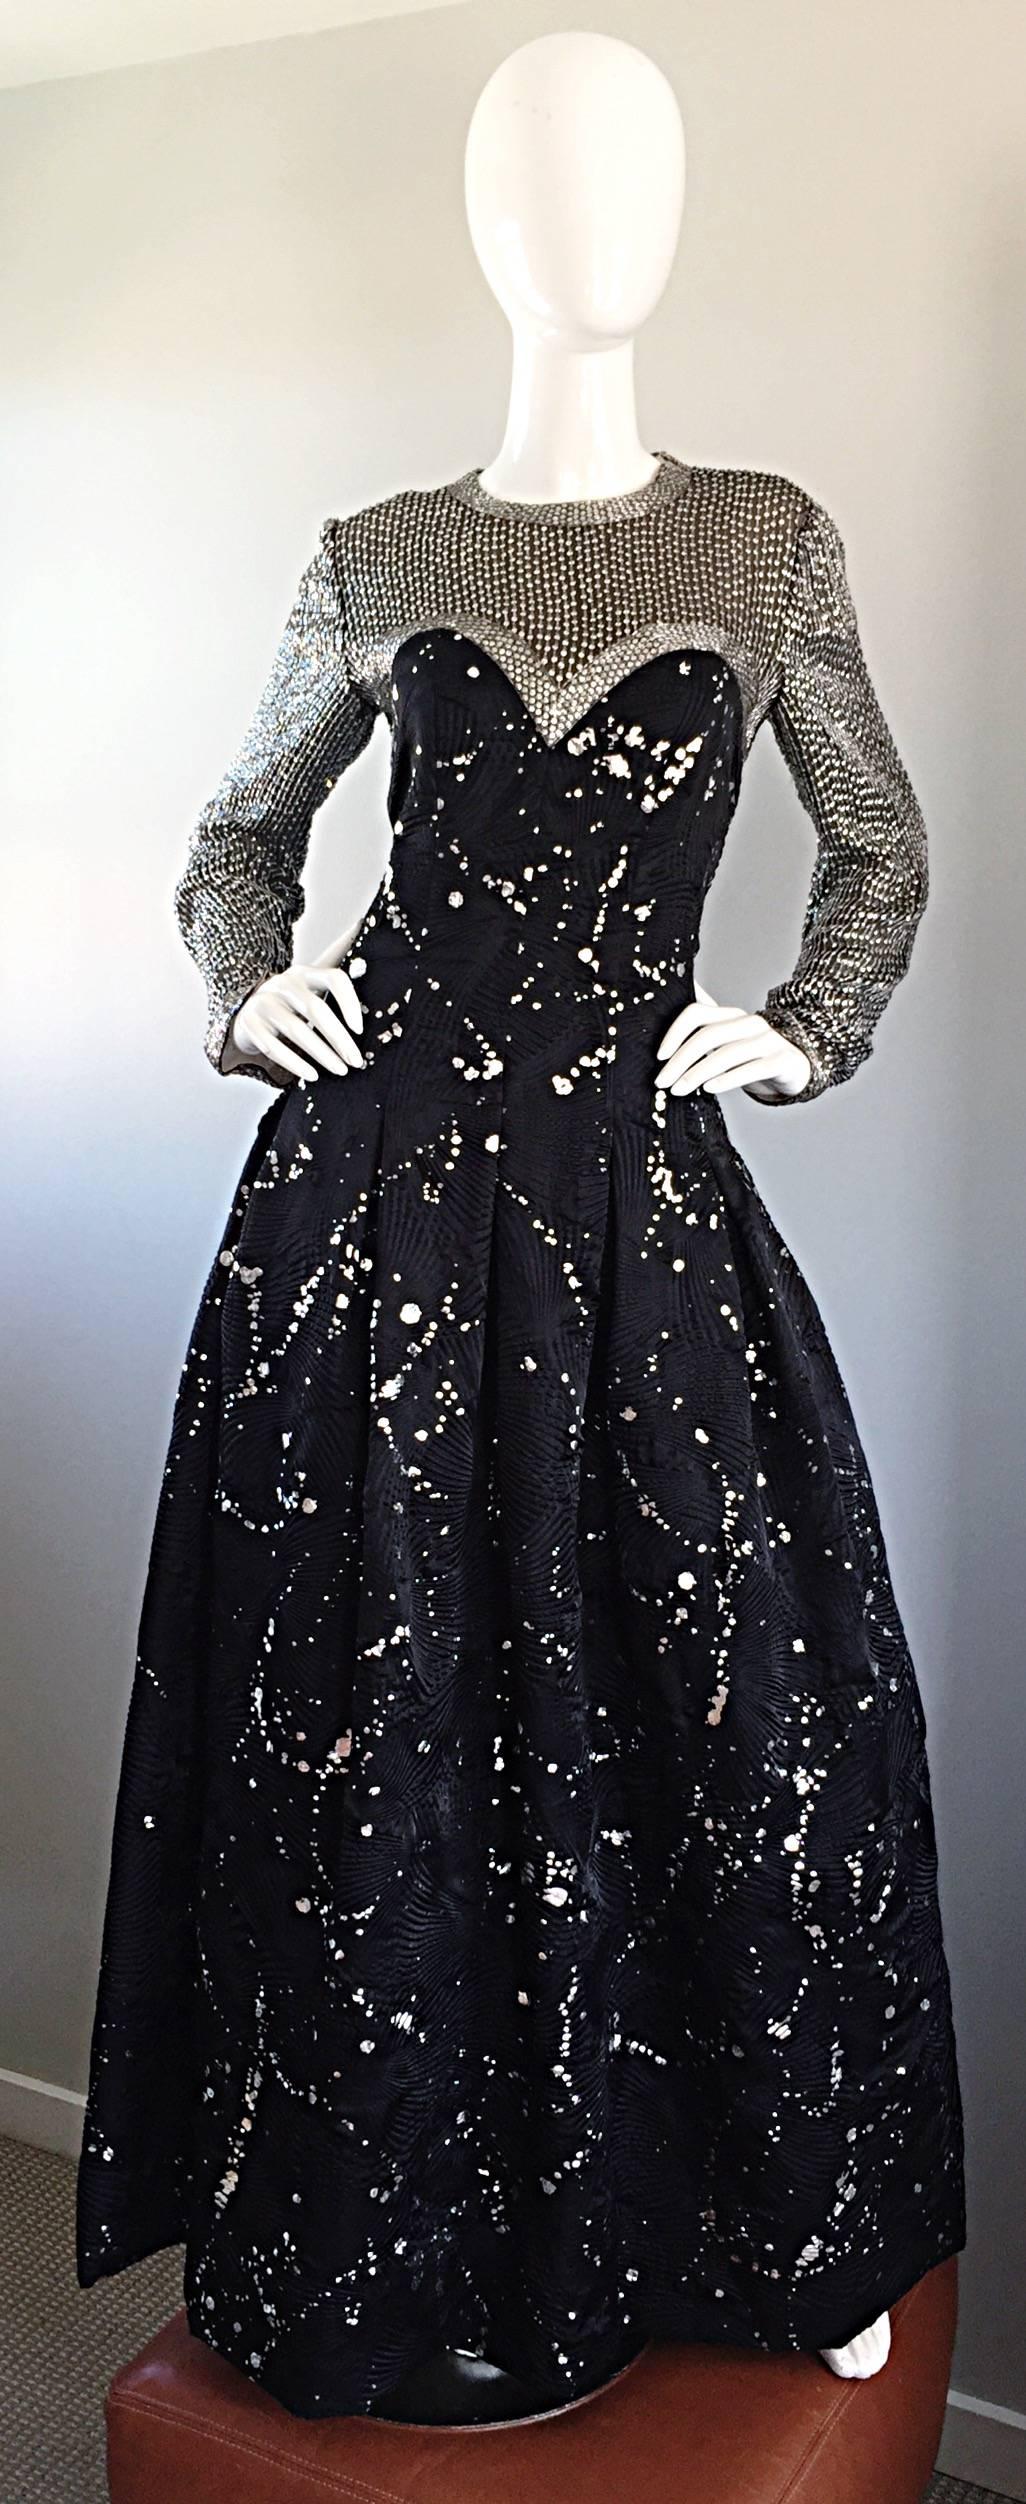 Exceptional vintage ANN LAWRENCE for NEIMAN MARCUS back and silver beaded evening silk gown! Features hand painted metallic silver 'platters' throughout the entire dress! Thousands of tiny sequins and beads hand-sewn throughout the entire bodice and